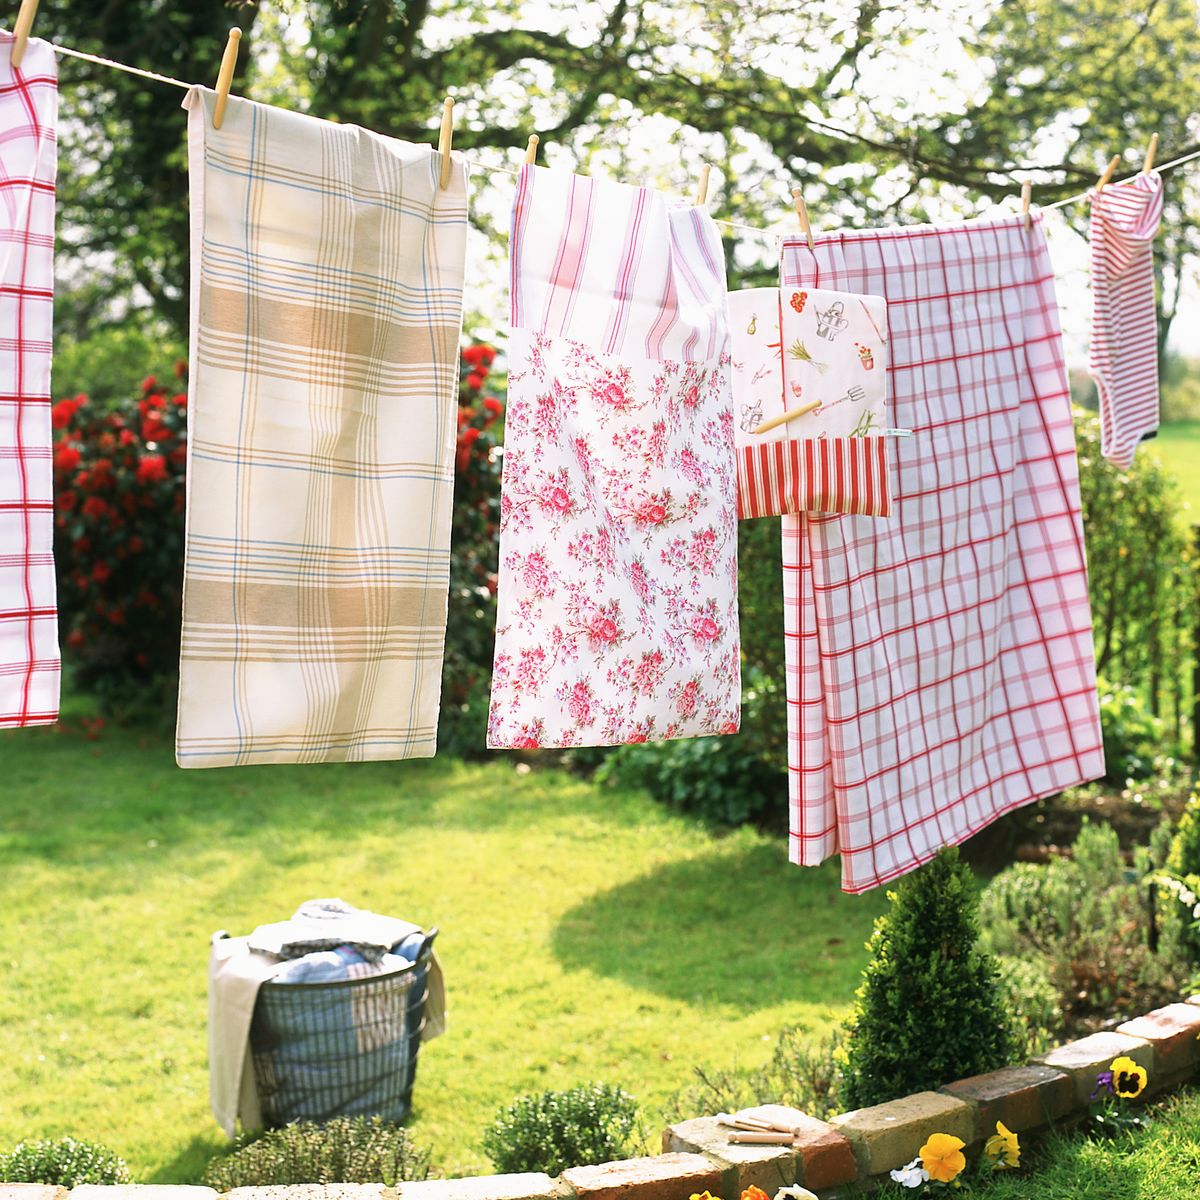 Mrs Hinch fan wows with genius washing line idea - hailed a game